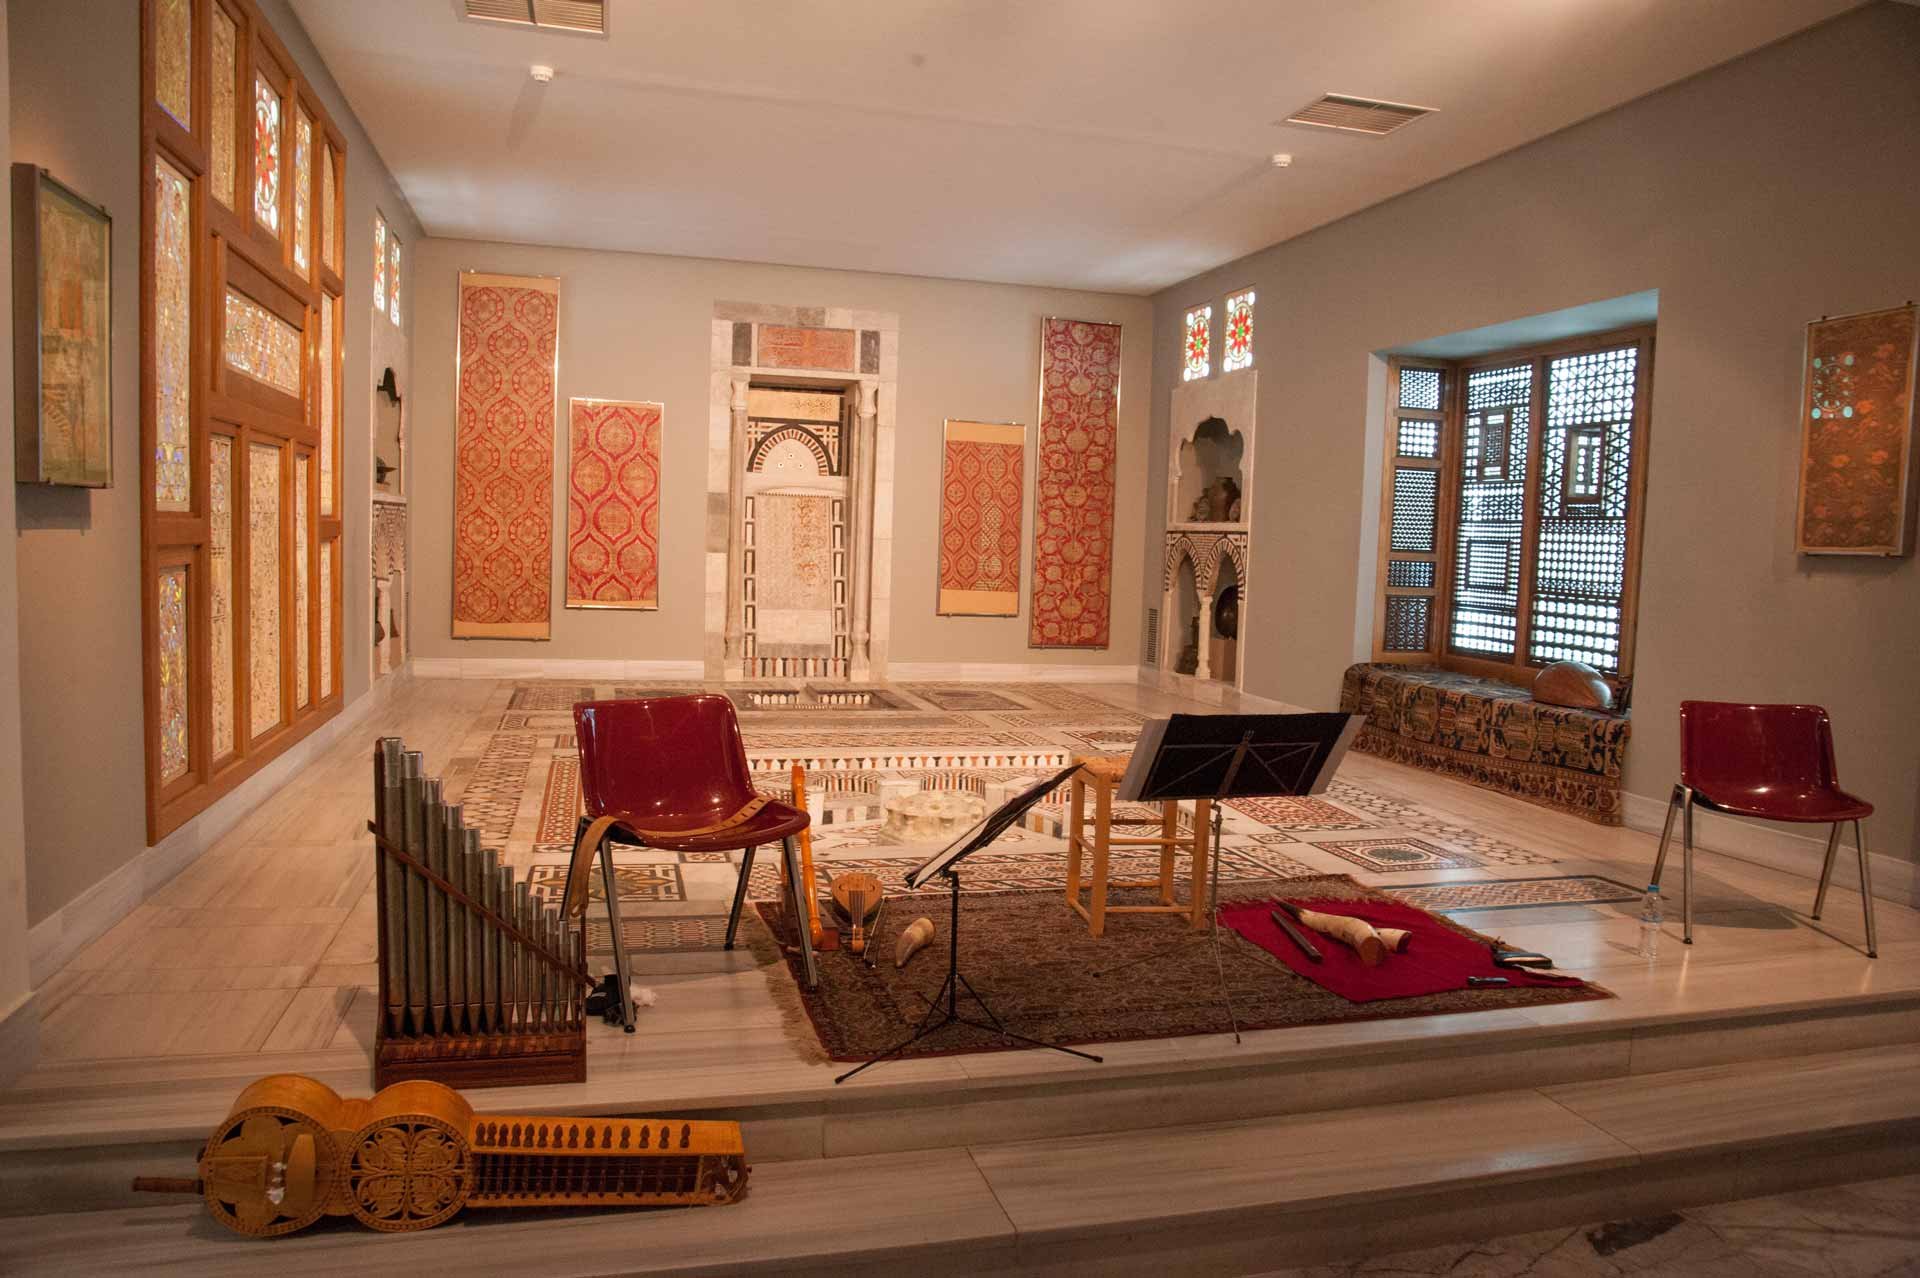 ROOM WITH INTERIOR FROM A CAIRO MANSION HOUSE 